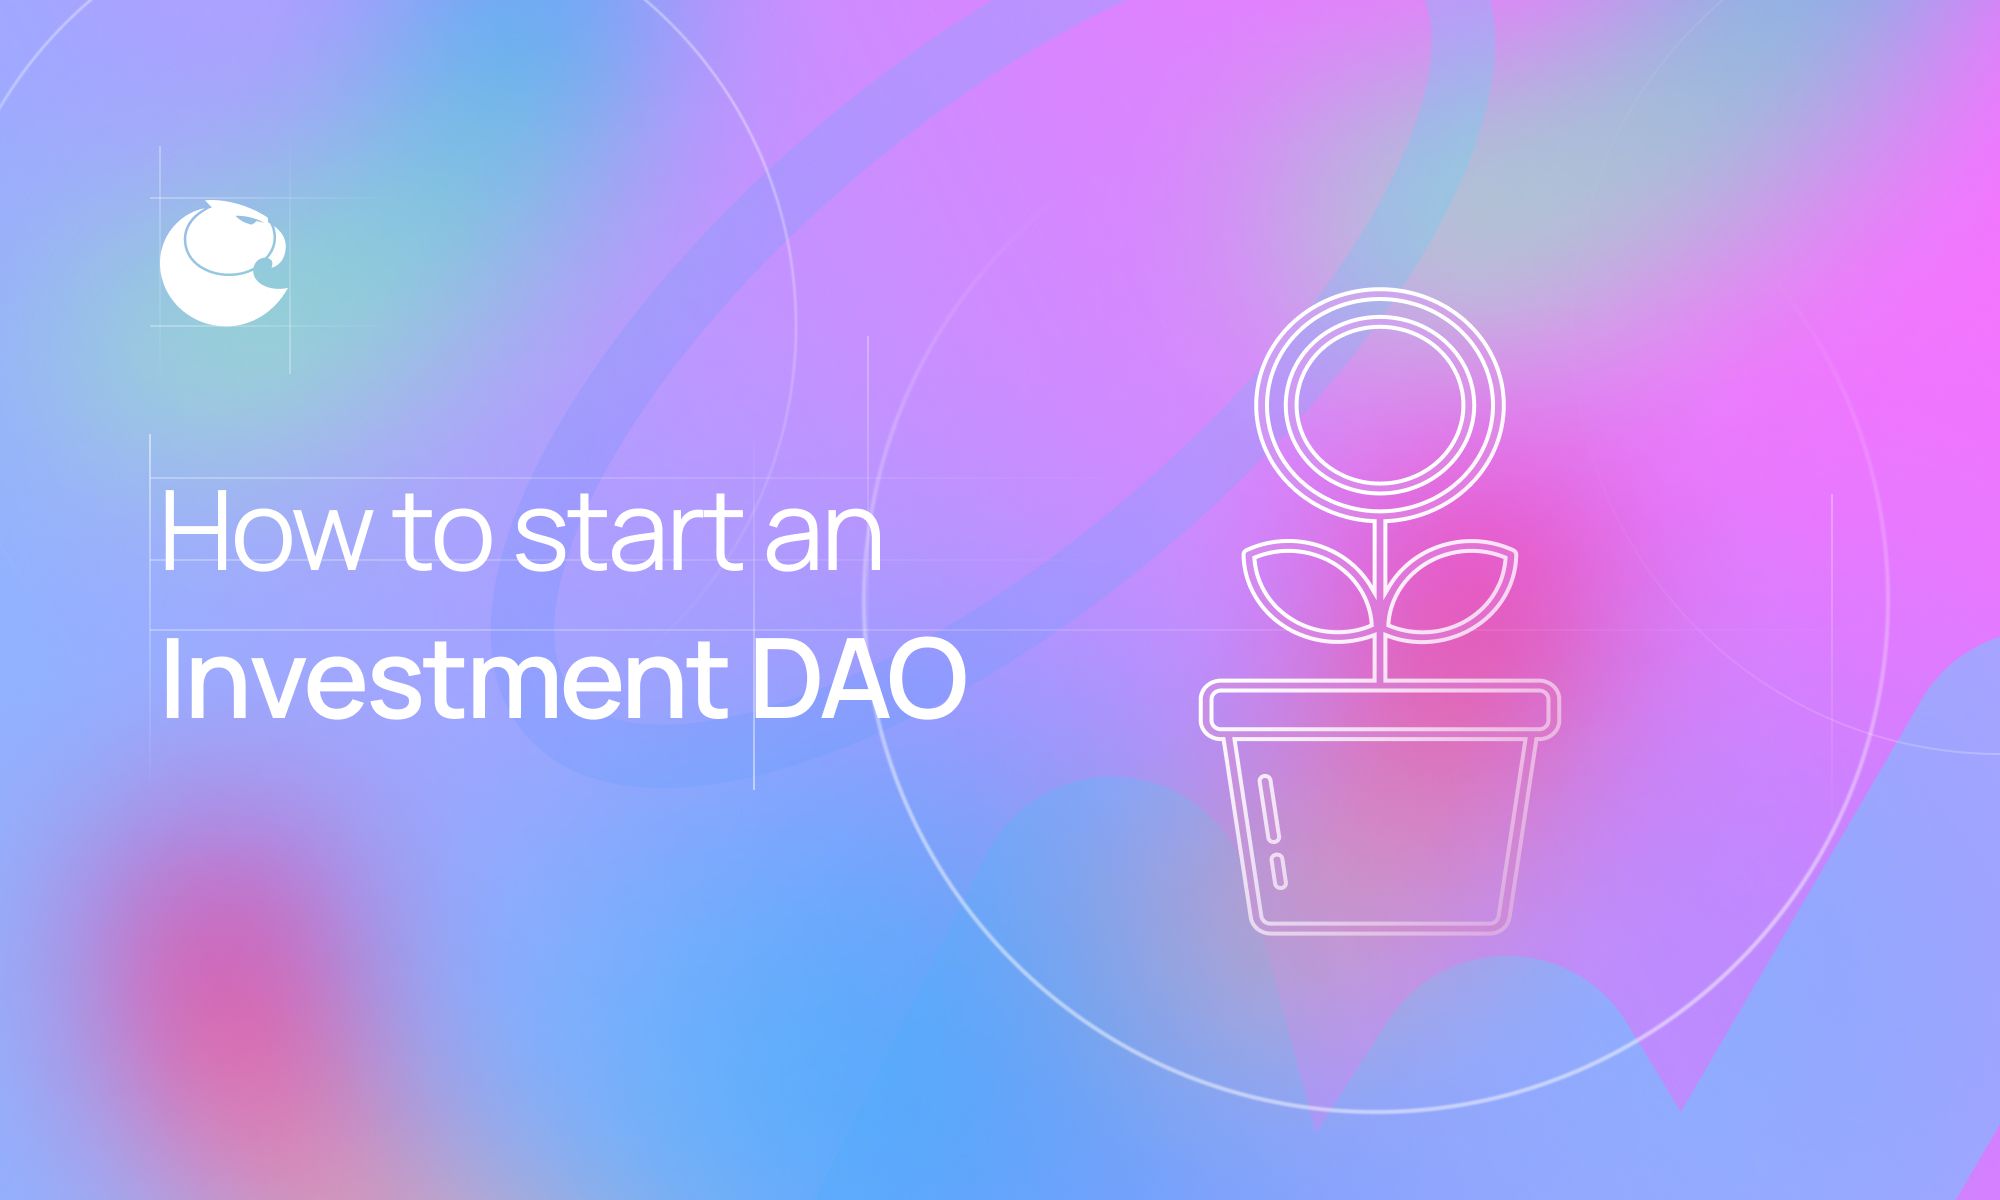 How to Start an Investment DAO